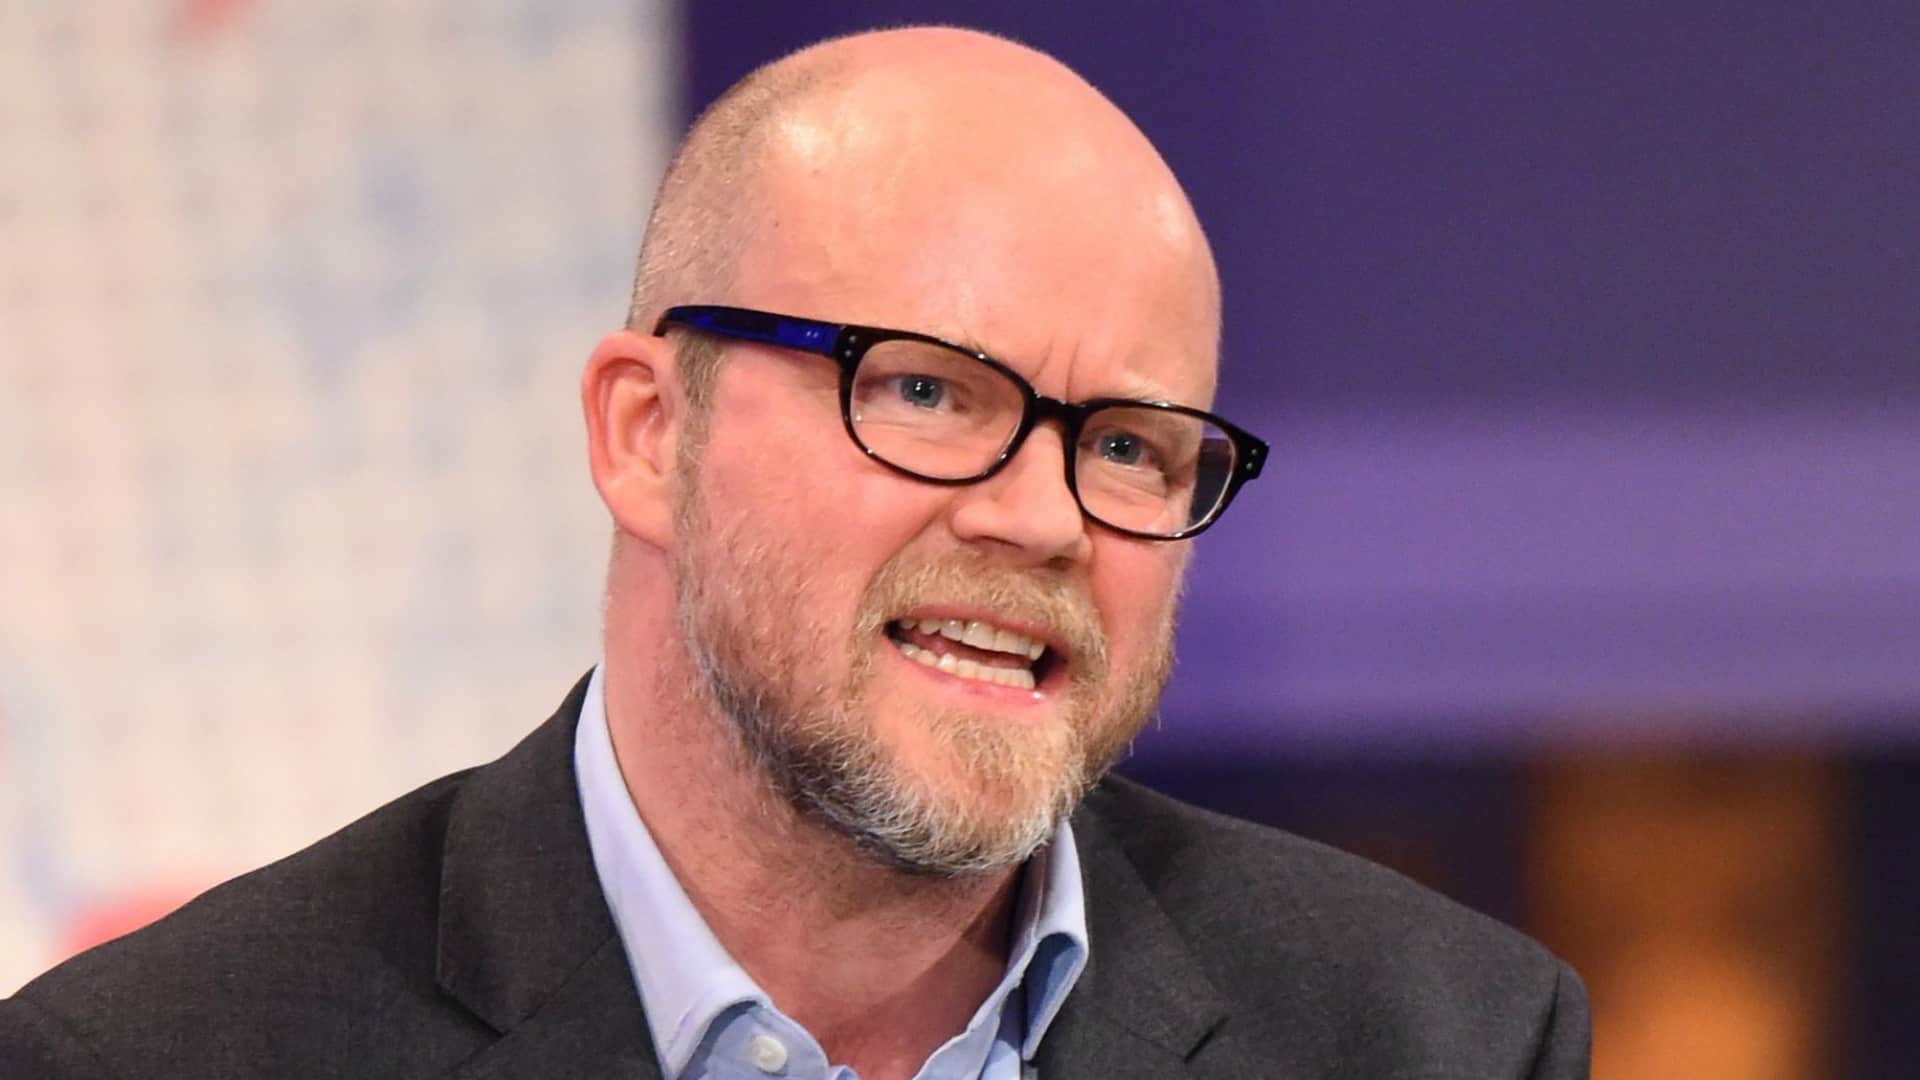 Toby Young starts dating site for ‘lockdown sceptics’